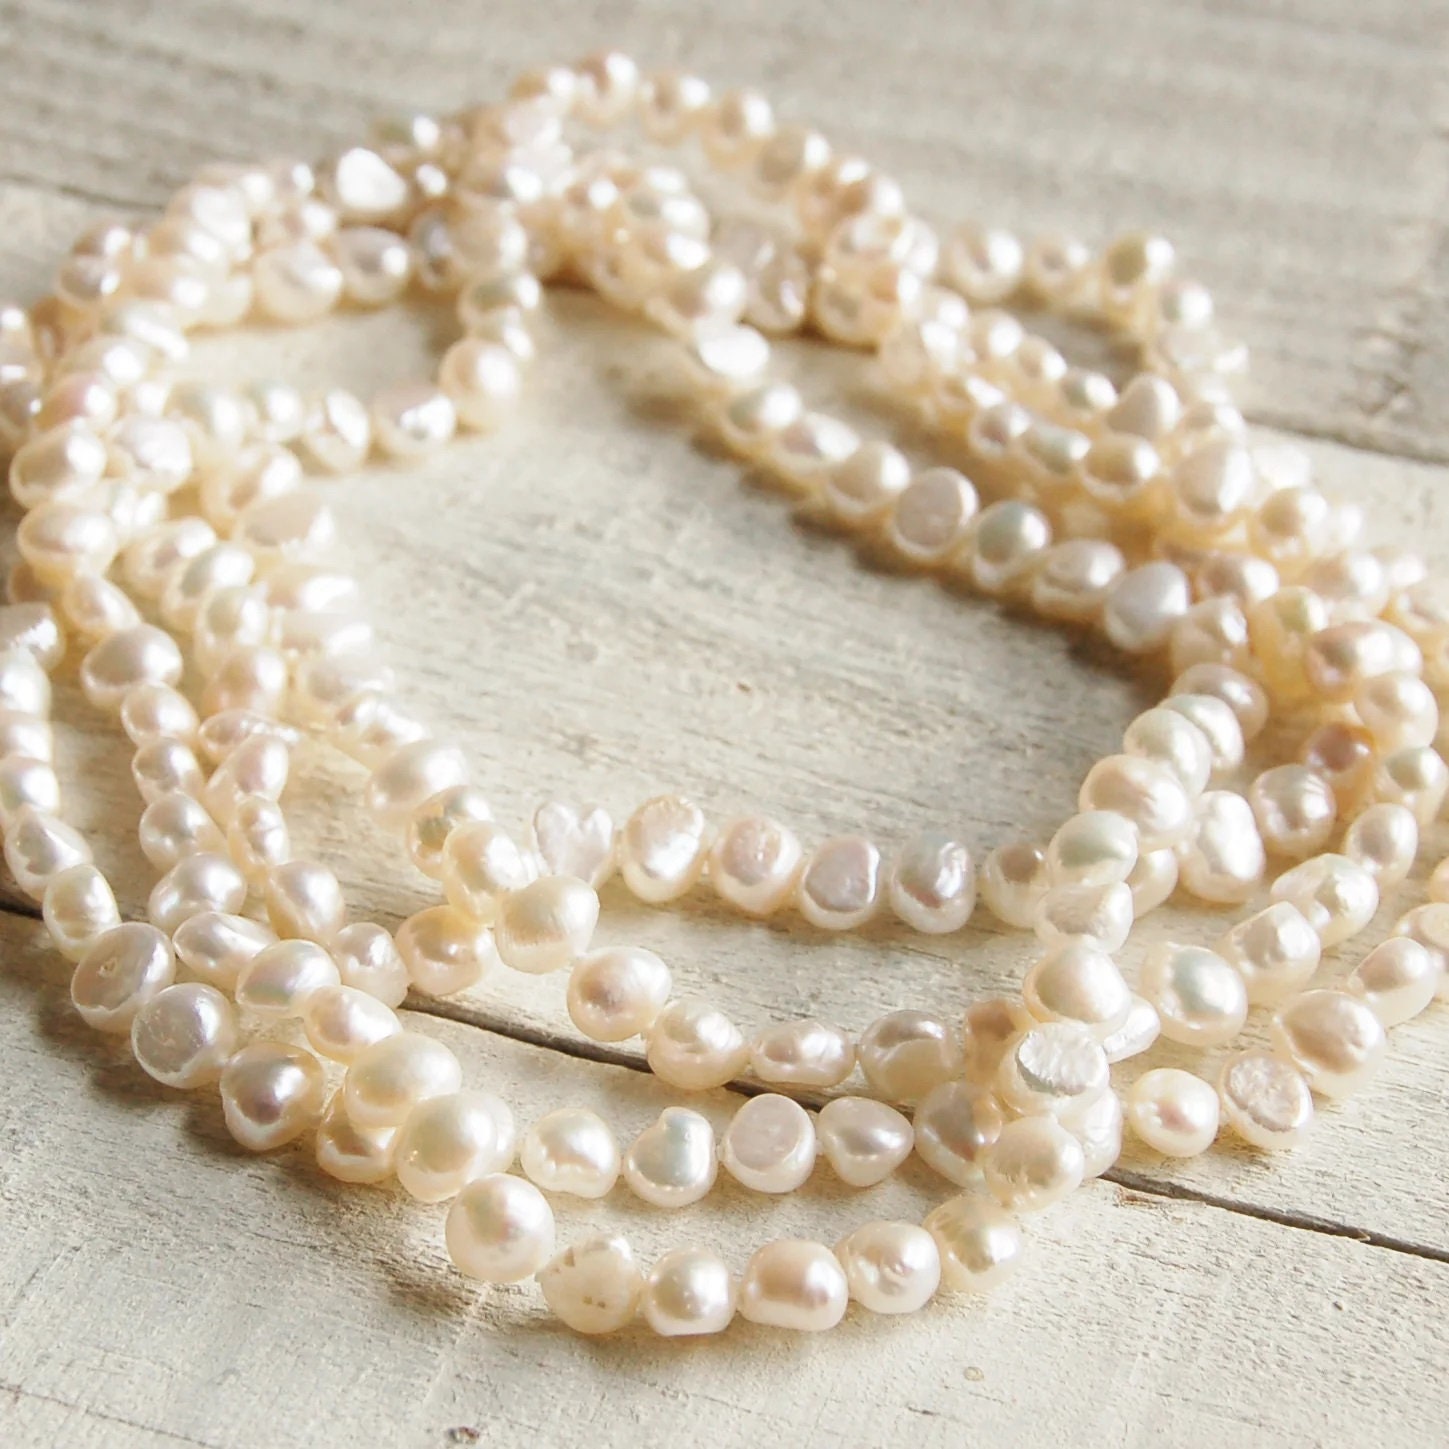 Bags of 48 7mm White Faux Pearl Necklaces 12 per Bag 24 Total